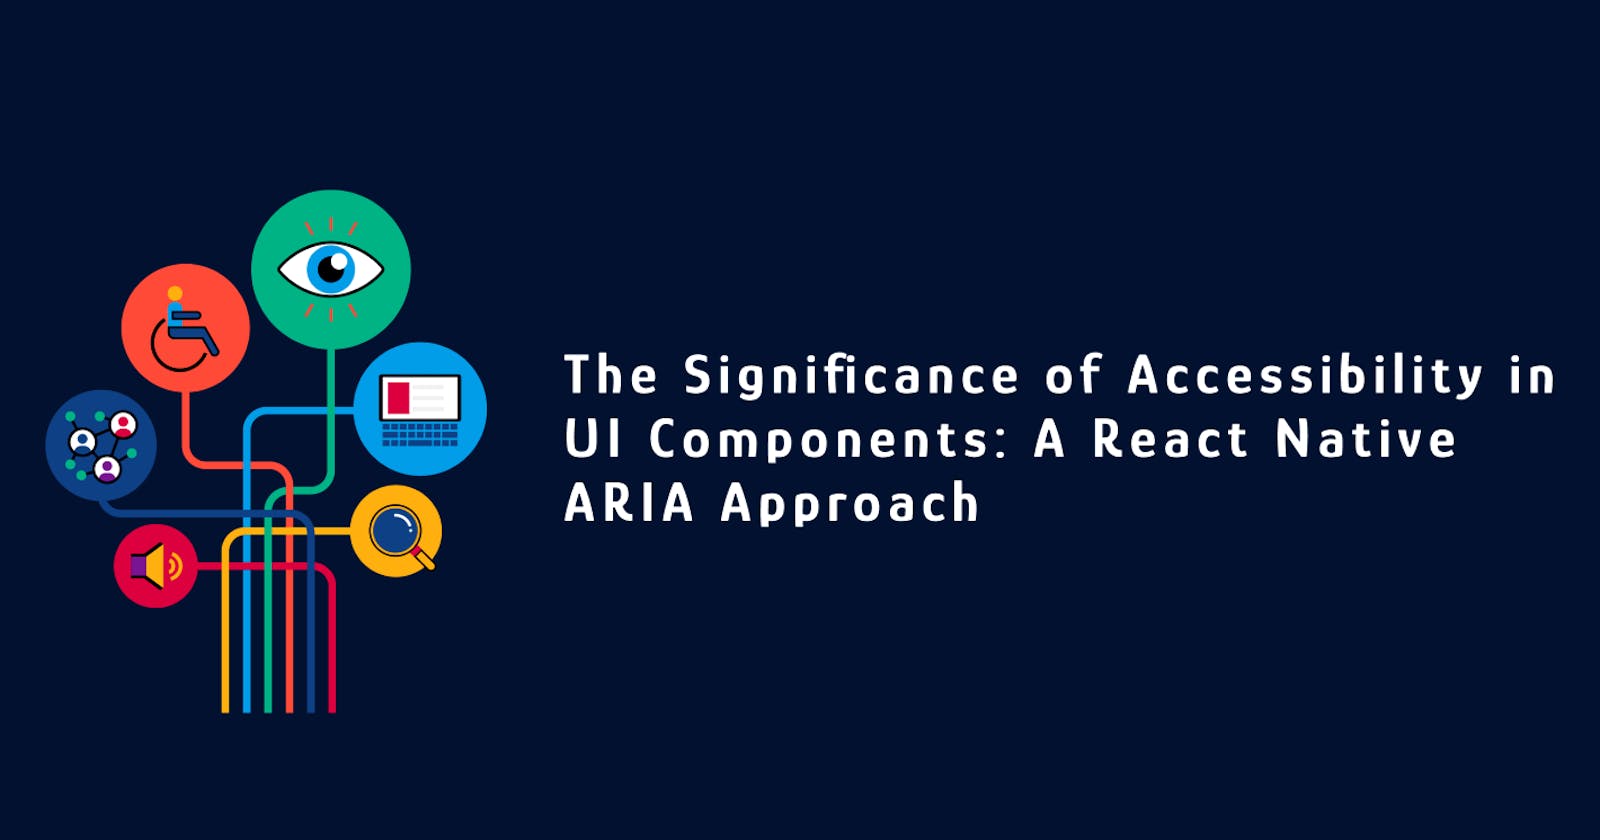 The Significance of Accessibility in UI Components: A React Native ARIA Approach